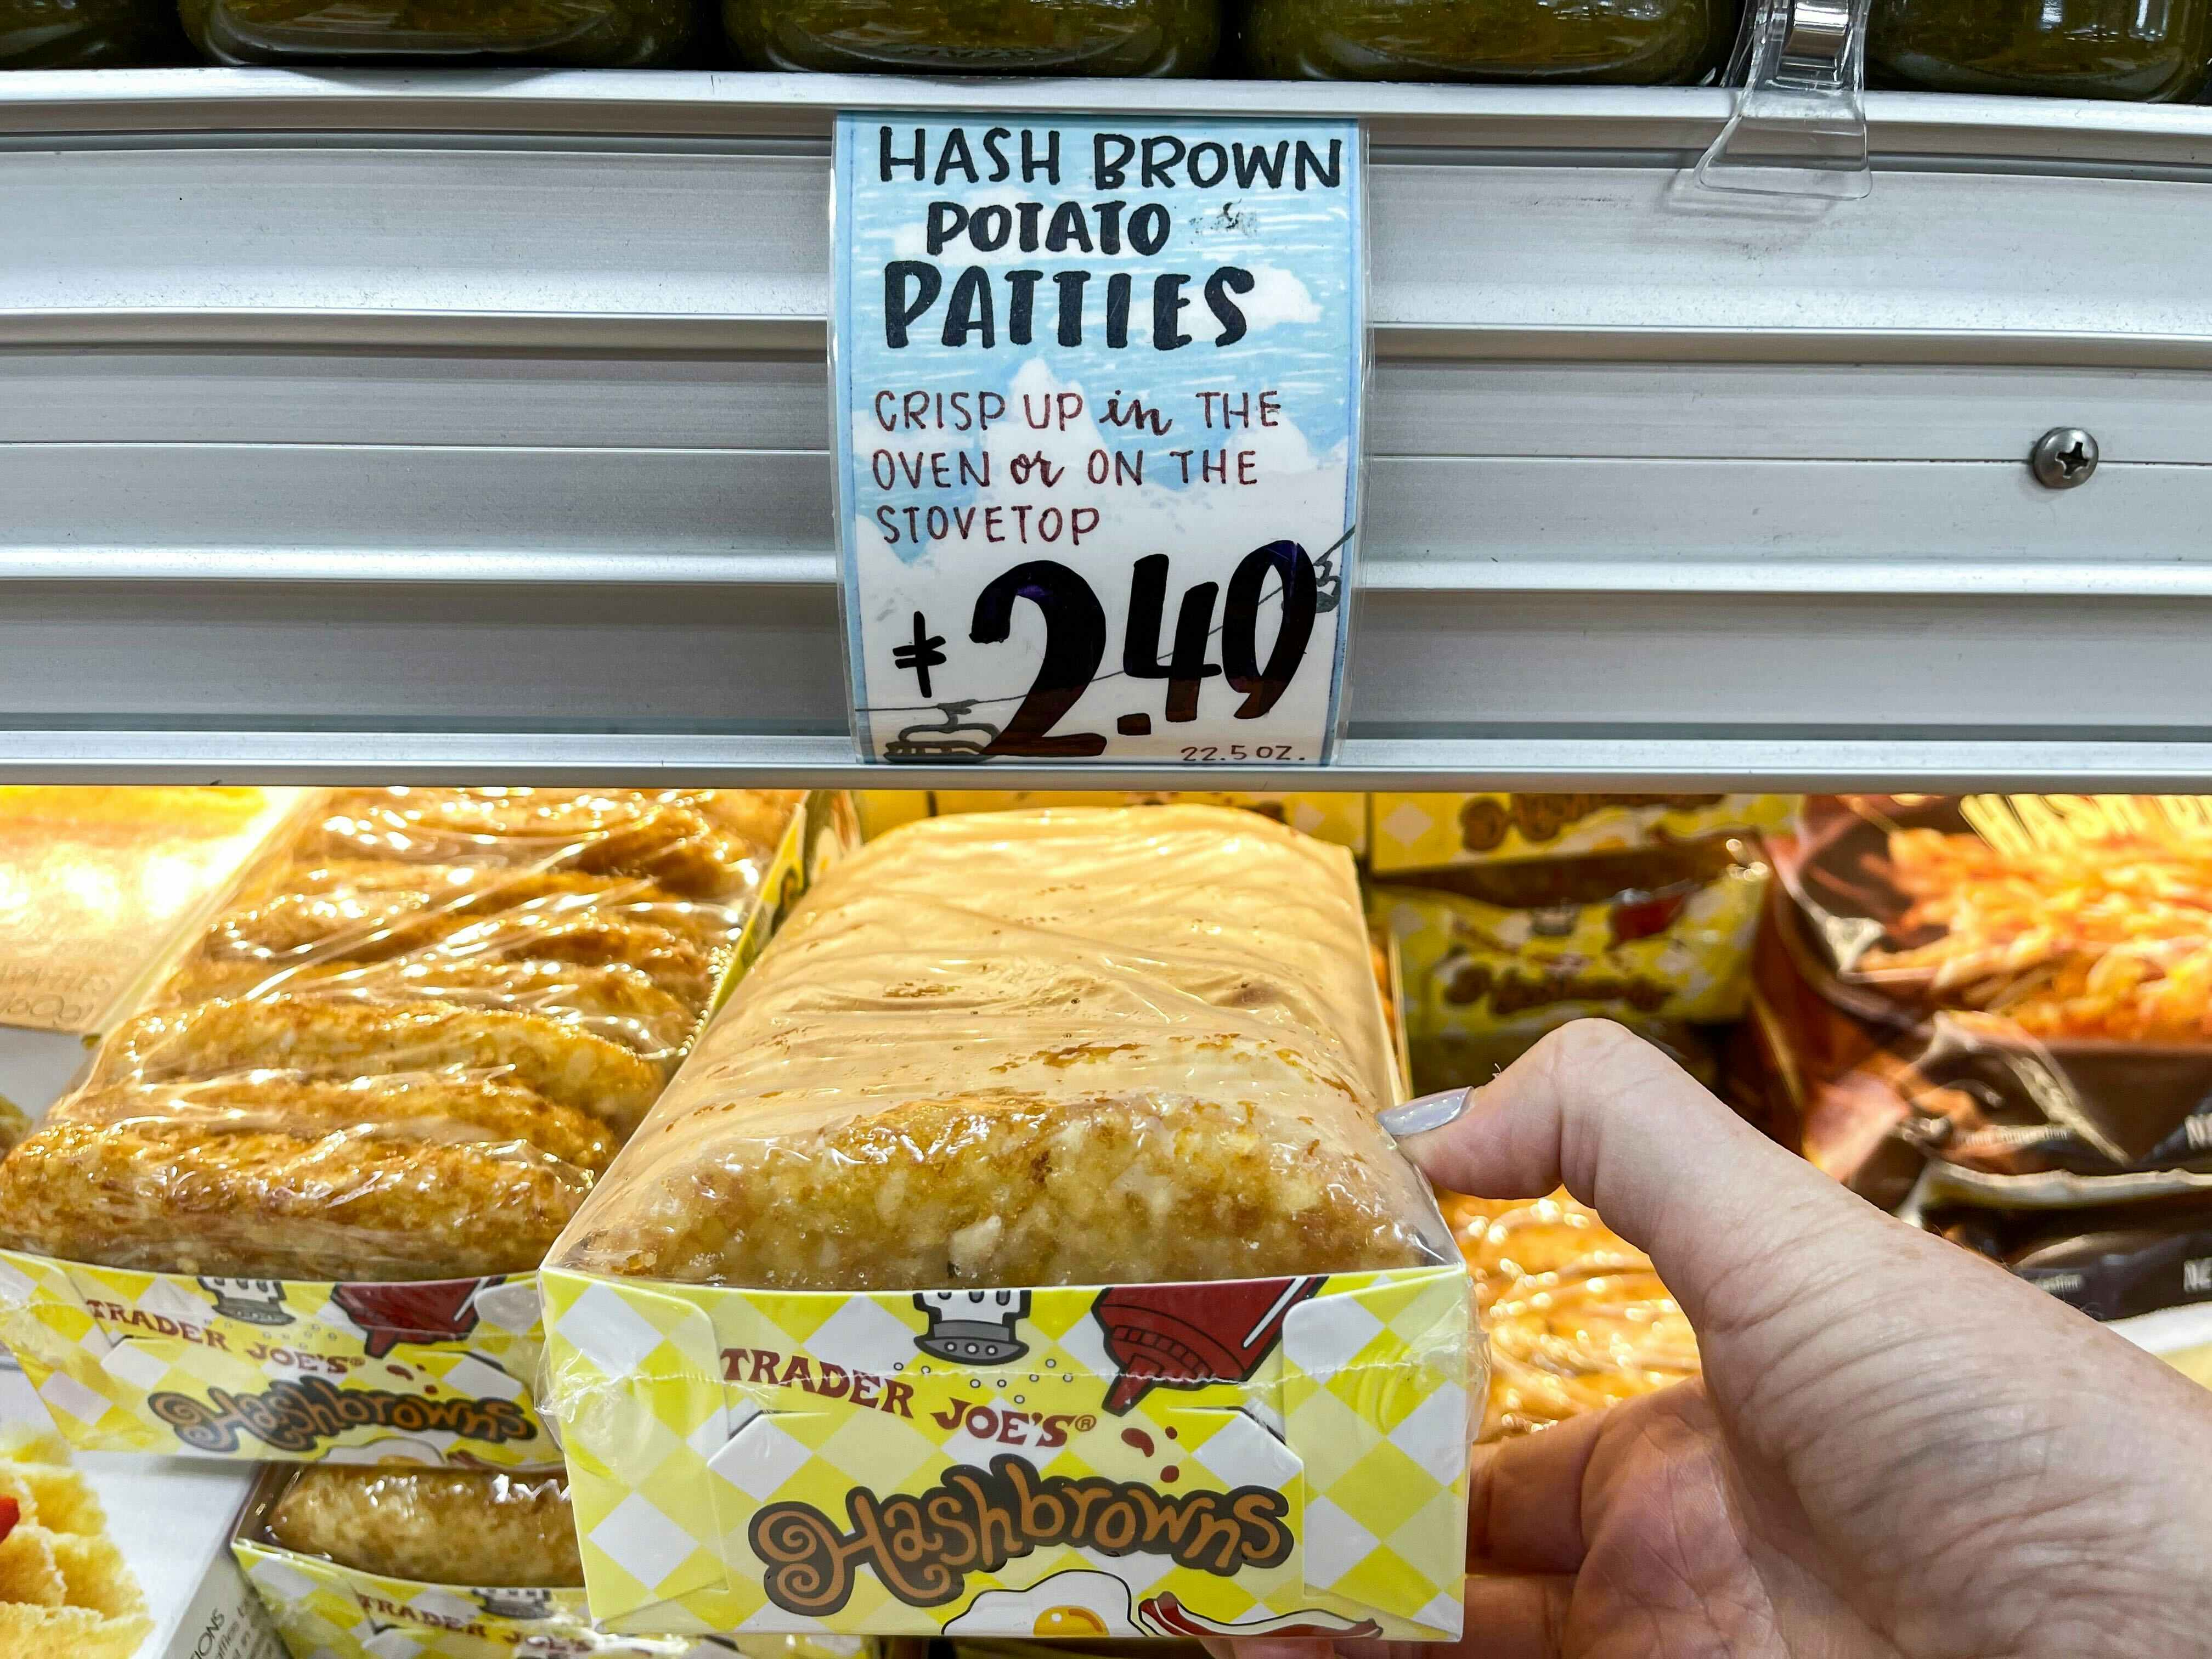 A person's hand holding a package of Trader Joe's Hashbrowns in front of the price sign on the shelf.